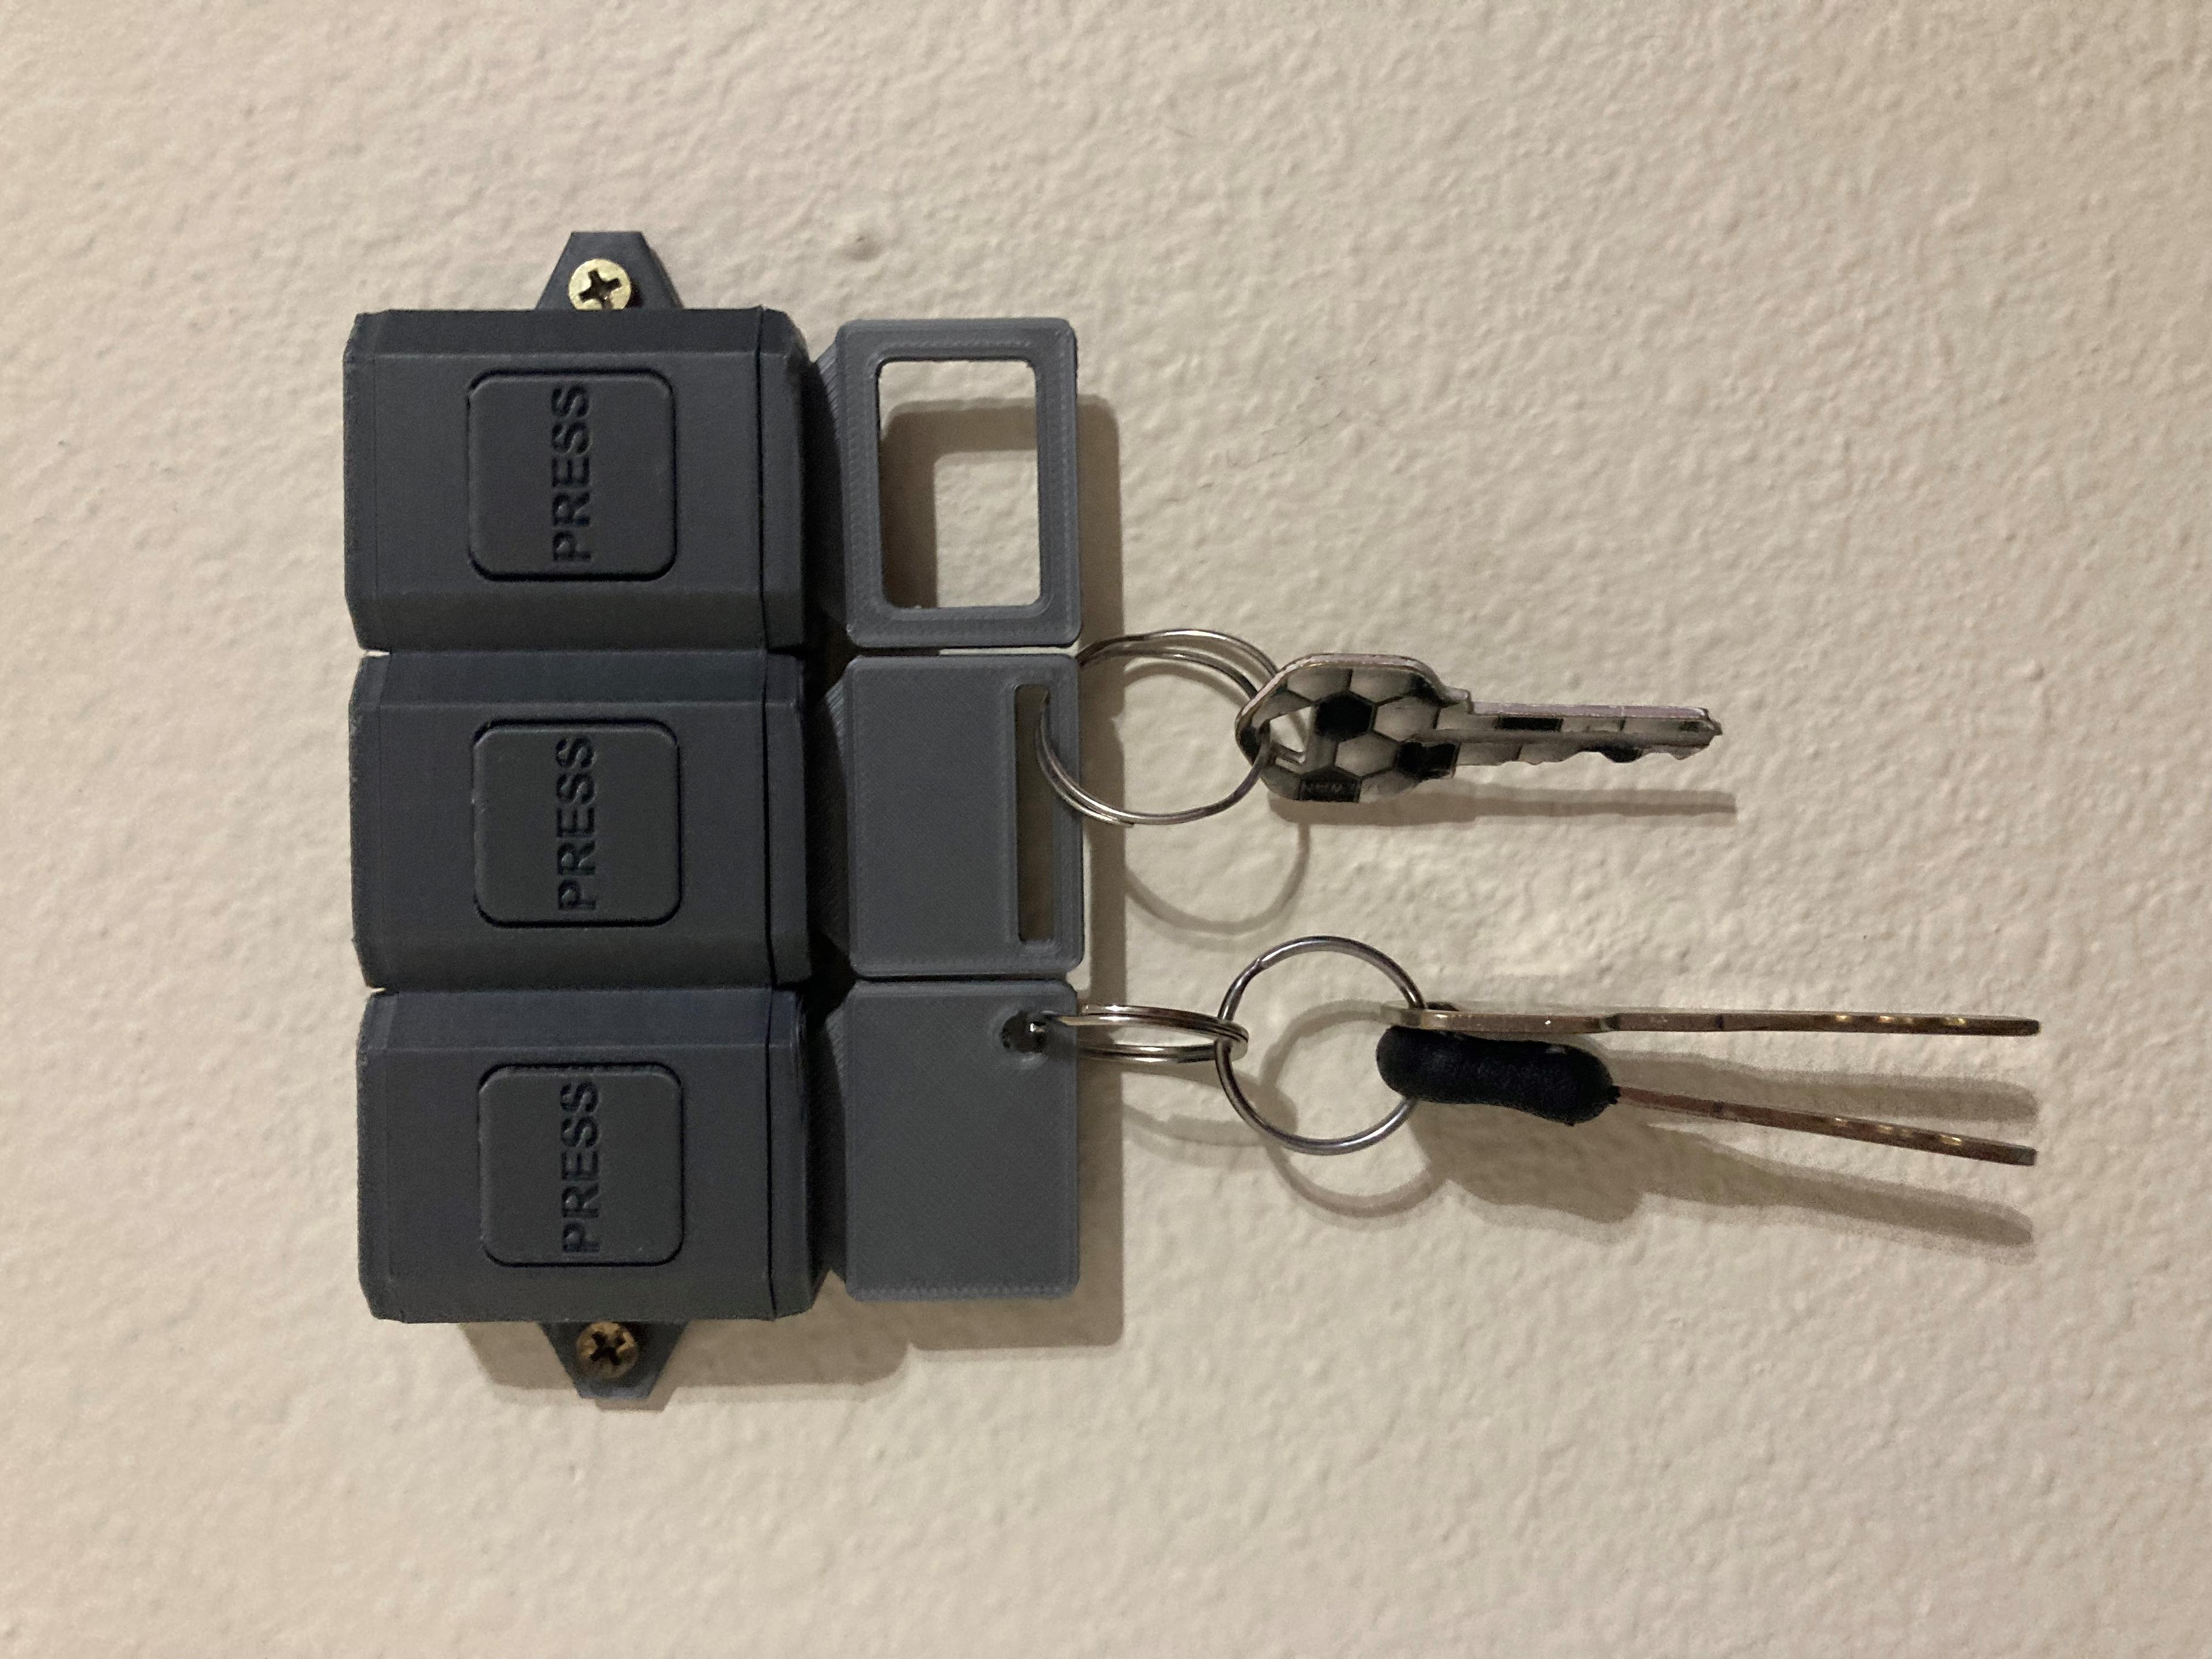 Wall Mount Key Hanger - Great model thx for this.                                                      p.s I was sent by Zack Freedman - 3d model